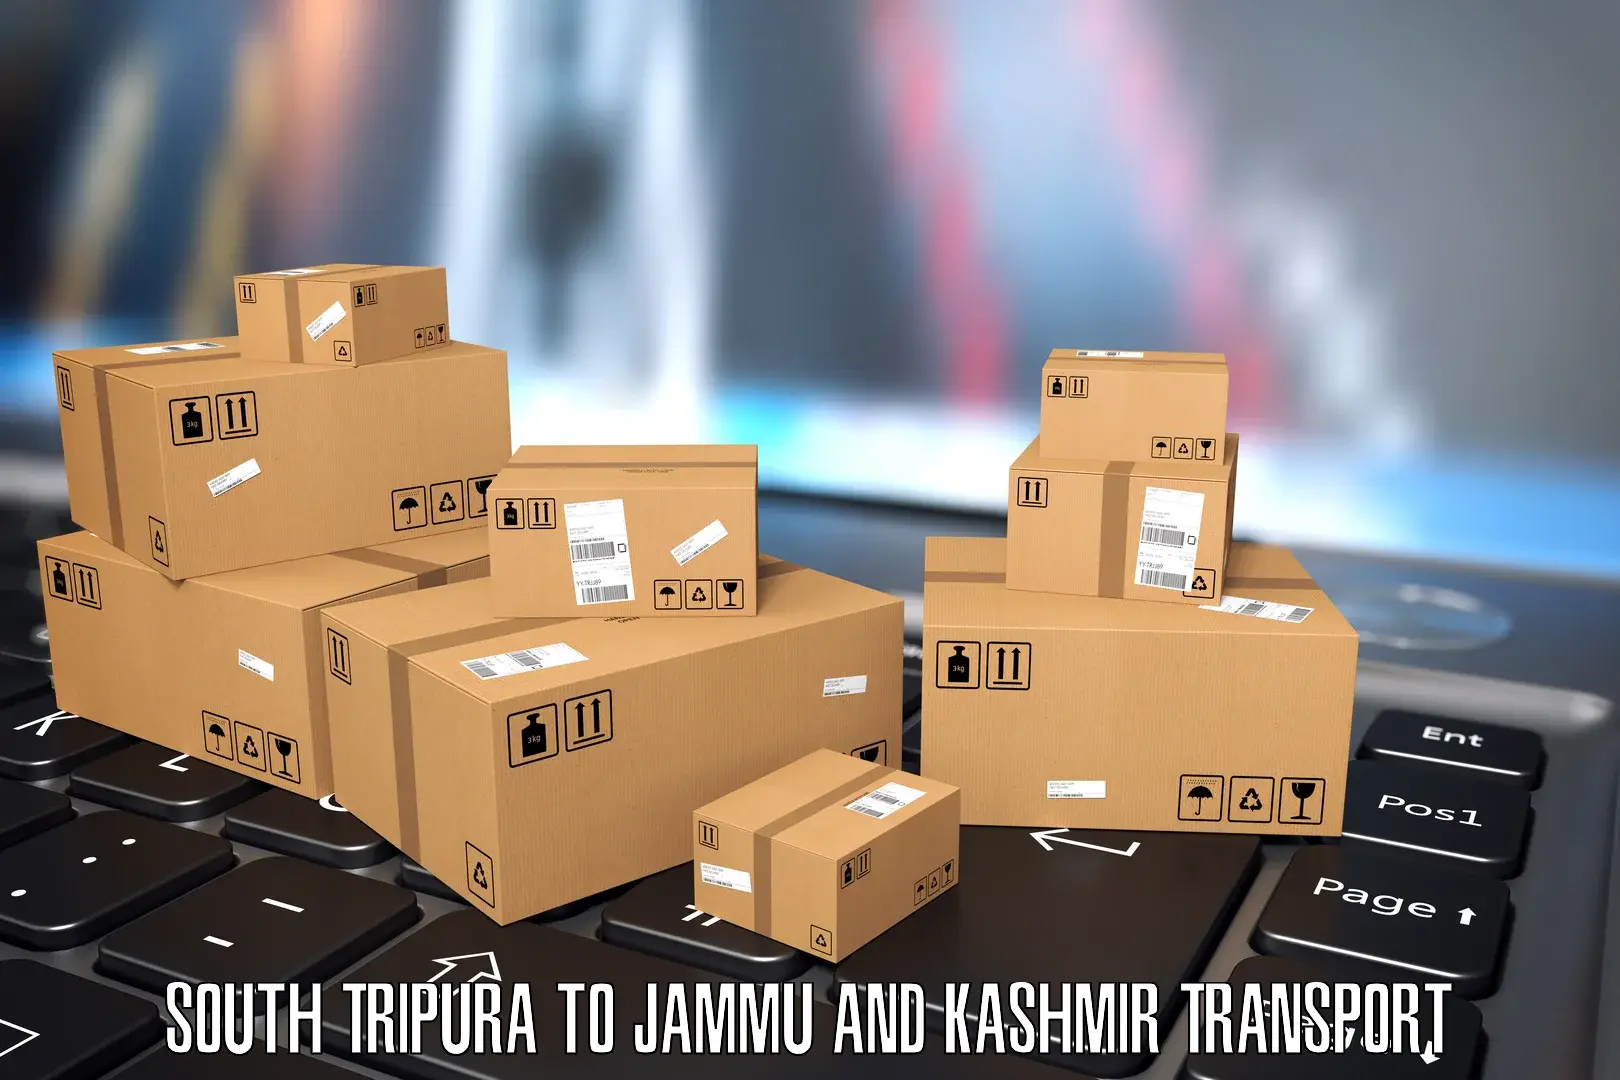 Cargo transportation services in South Tripura to Baramulla